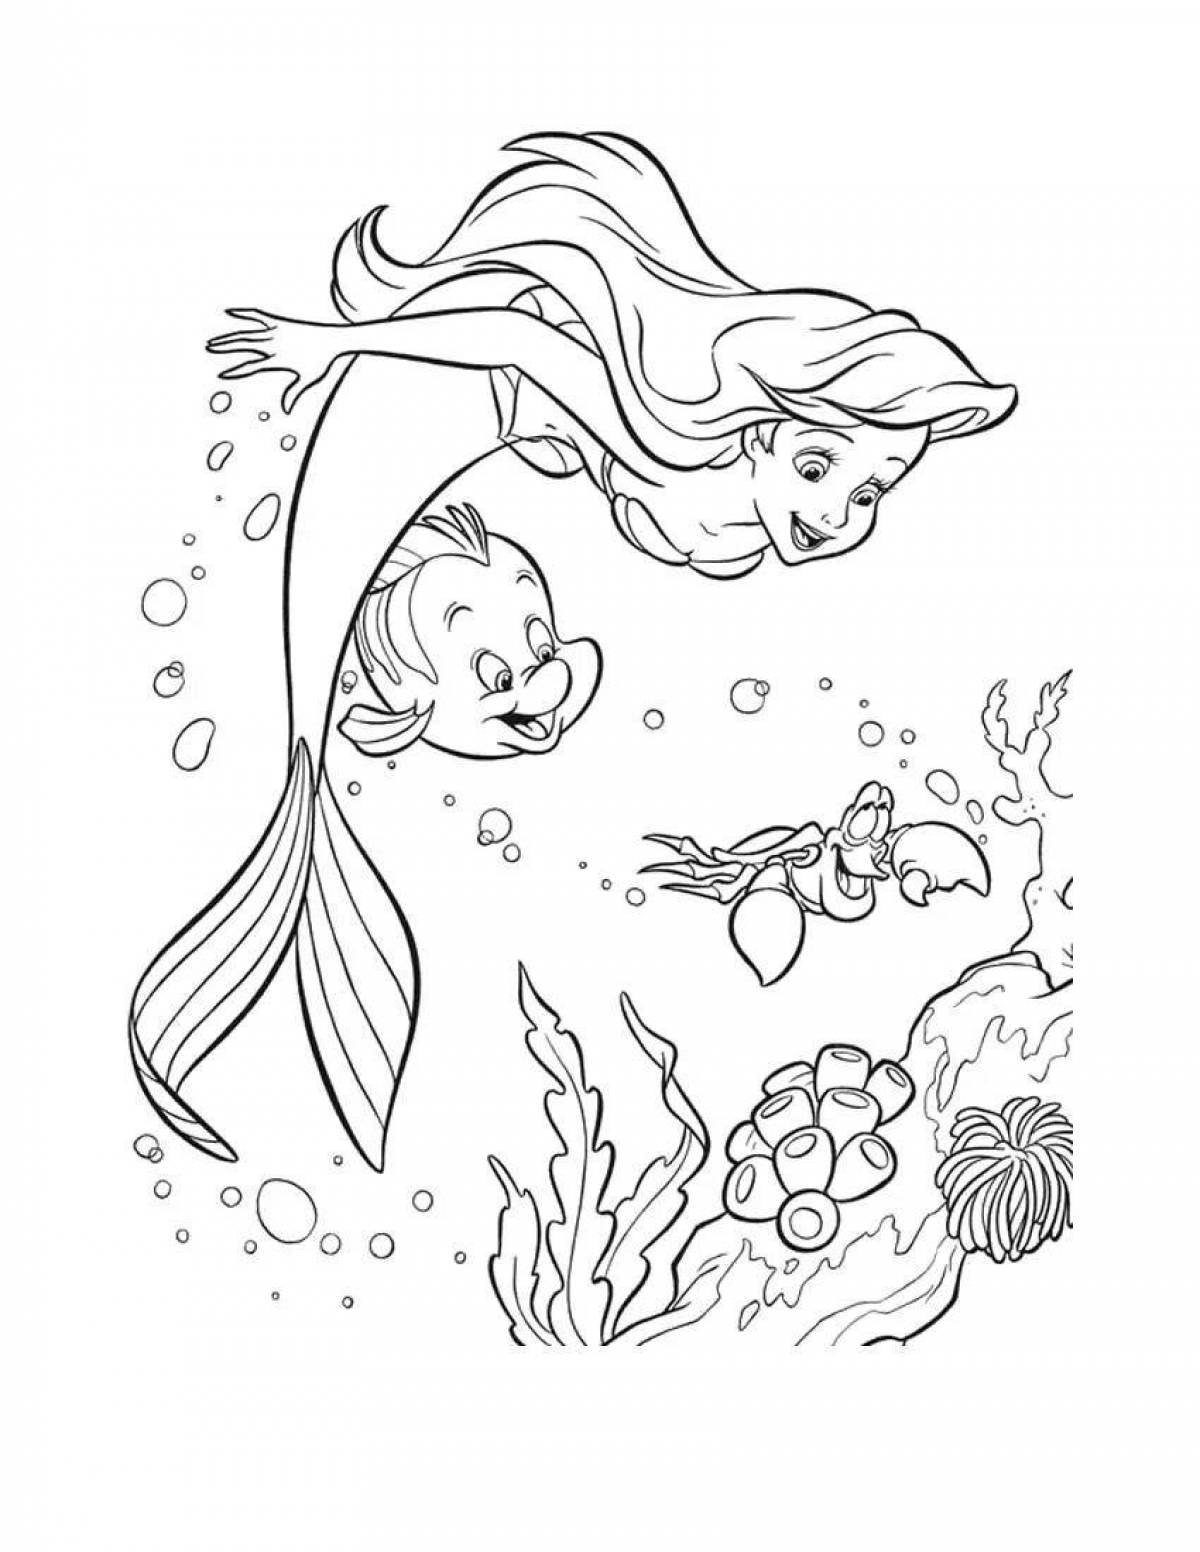 Fun coloring page 6 for girls